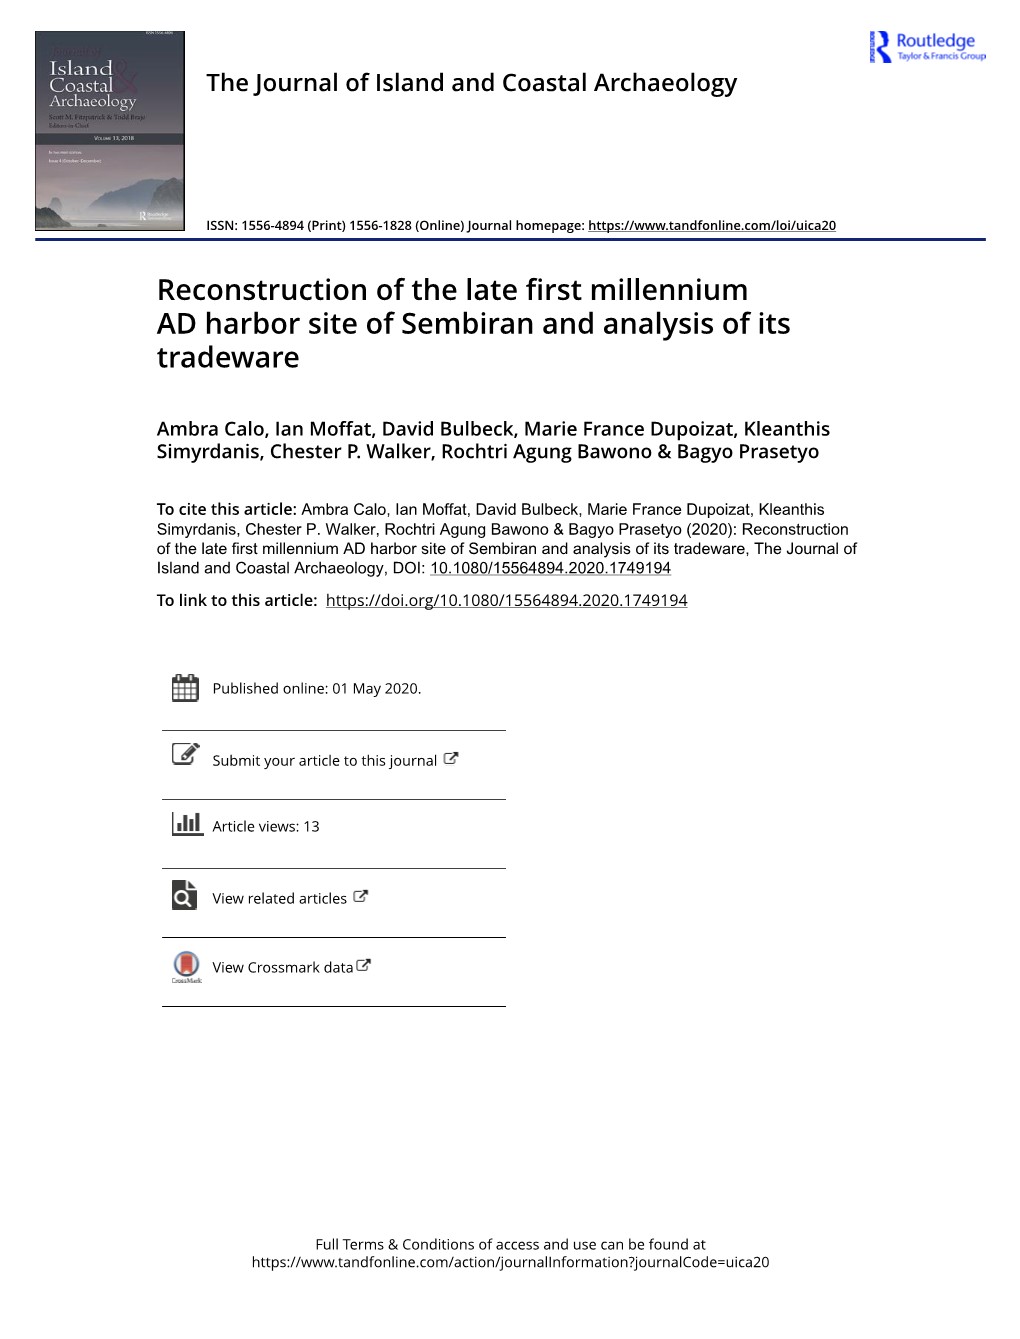 Reconstruction of the Late First Millennium AD Harbor Site of Sembiran and Analysis of Its Tradeware